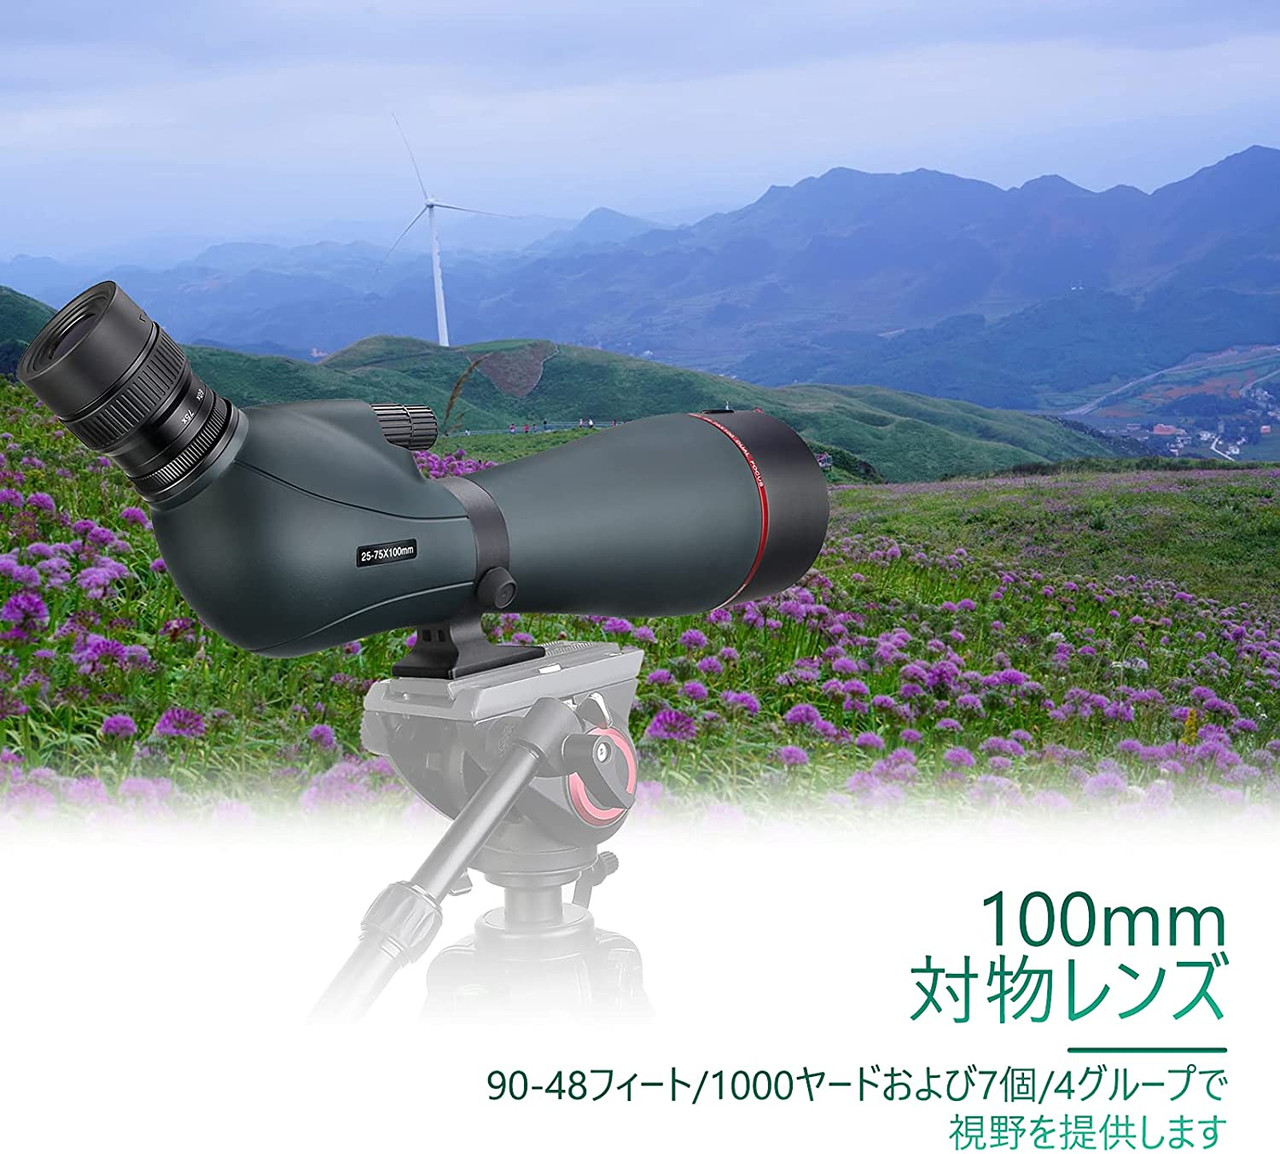 SVBONY SV406 25-75x100mm Spotting Scope Dual Focusing HD Lightweight Anti-fog and Waterproof with Soft Carrying Case